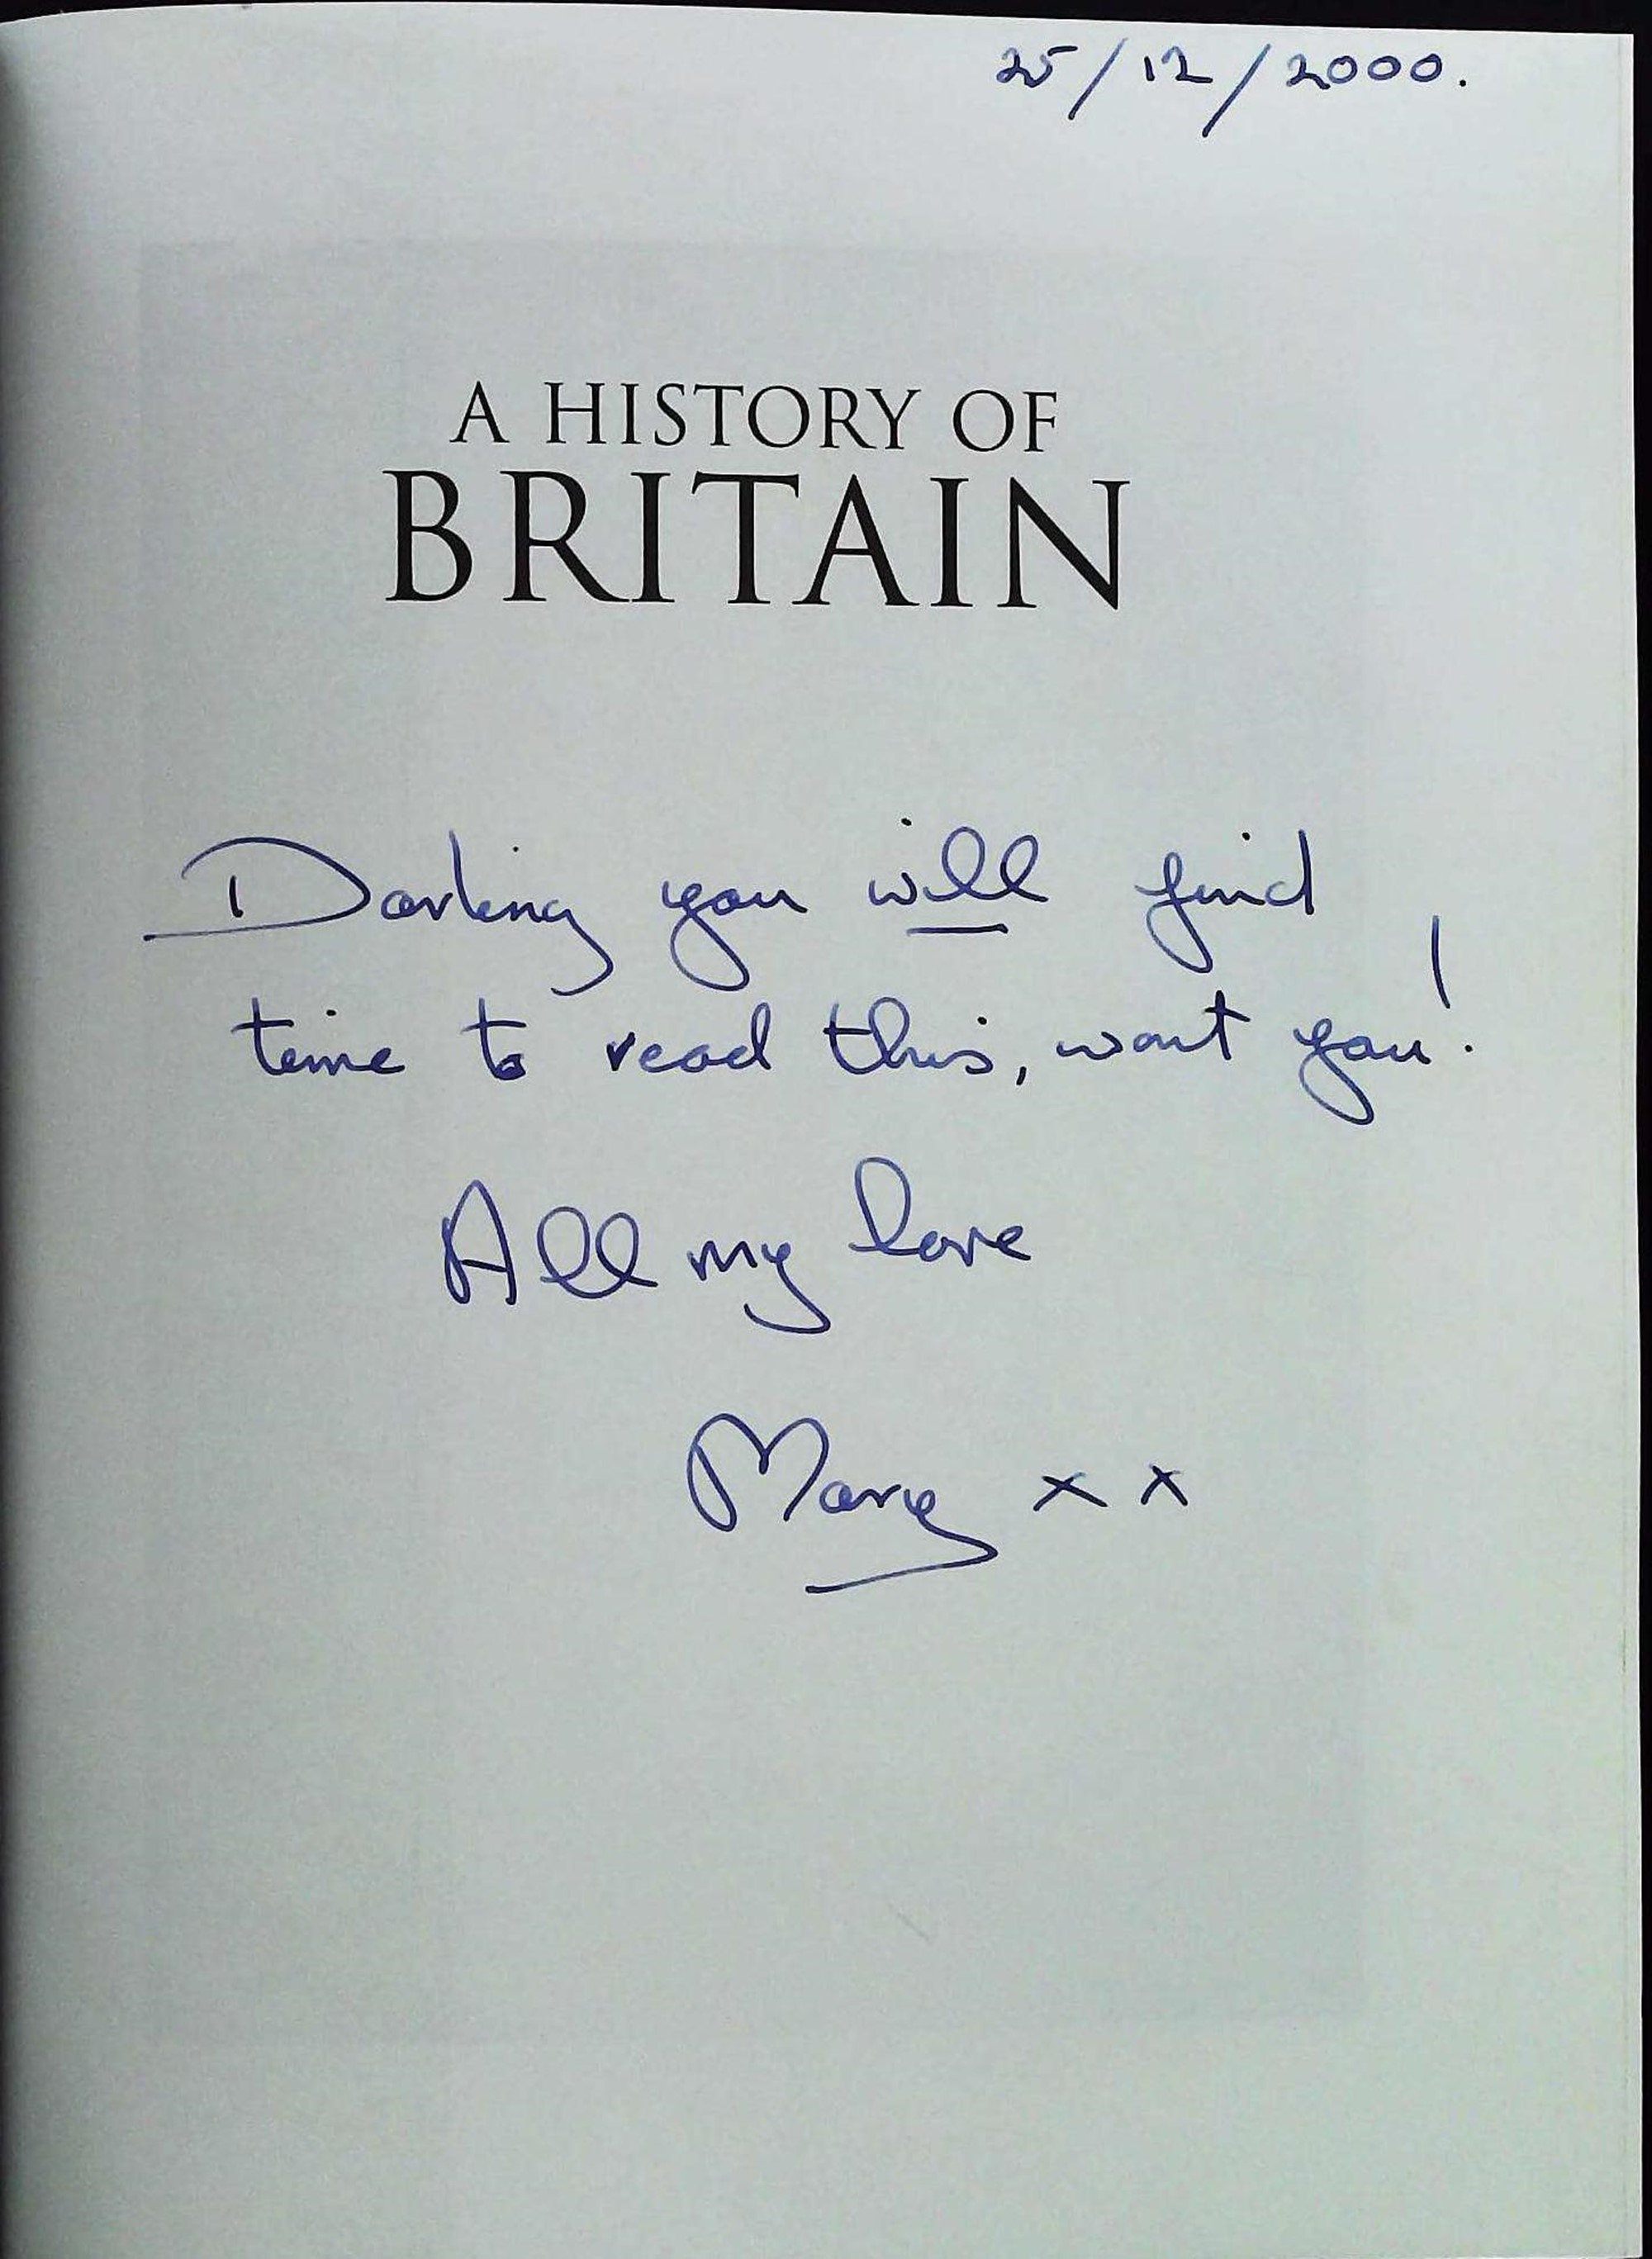 A History Of Britain AT The Edge Of The World? 3000 BC AD 1603 hardback book by Simon Schama - Image 3 of 4